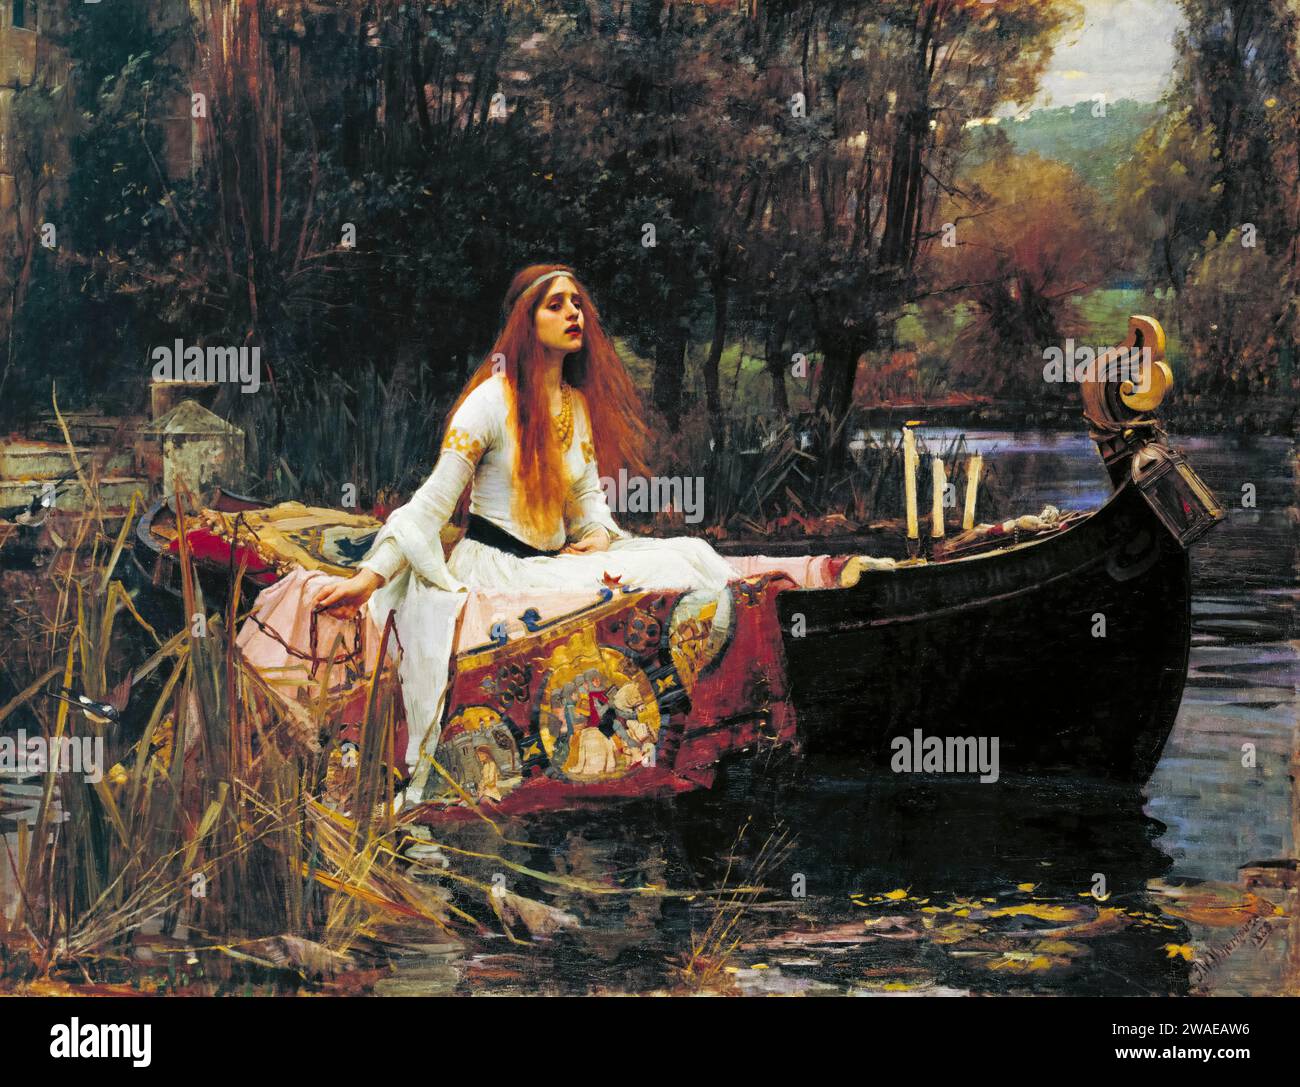 John William Waterhouse, The Lady of Shalott, painting in oil on canvas, 1888 Stock Photo